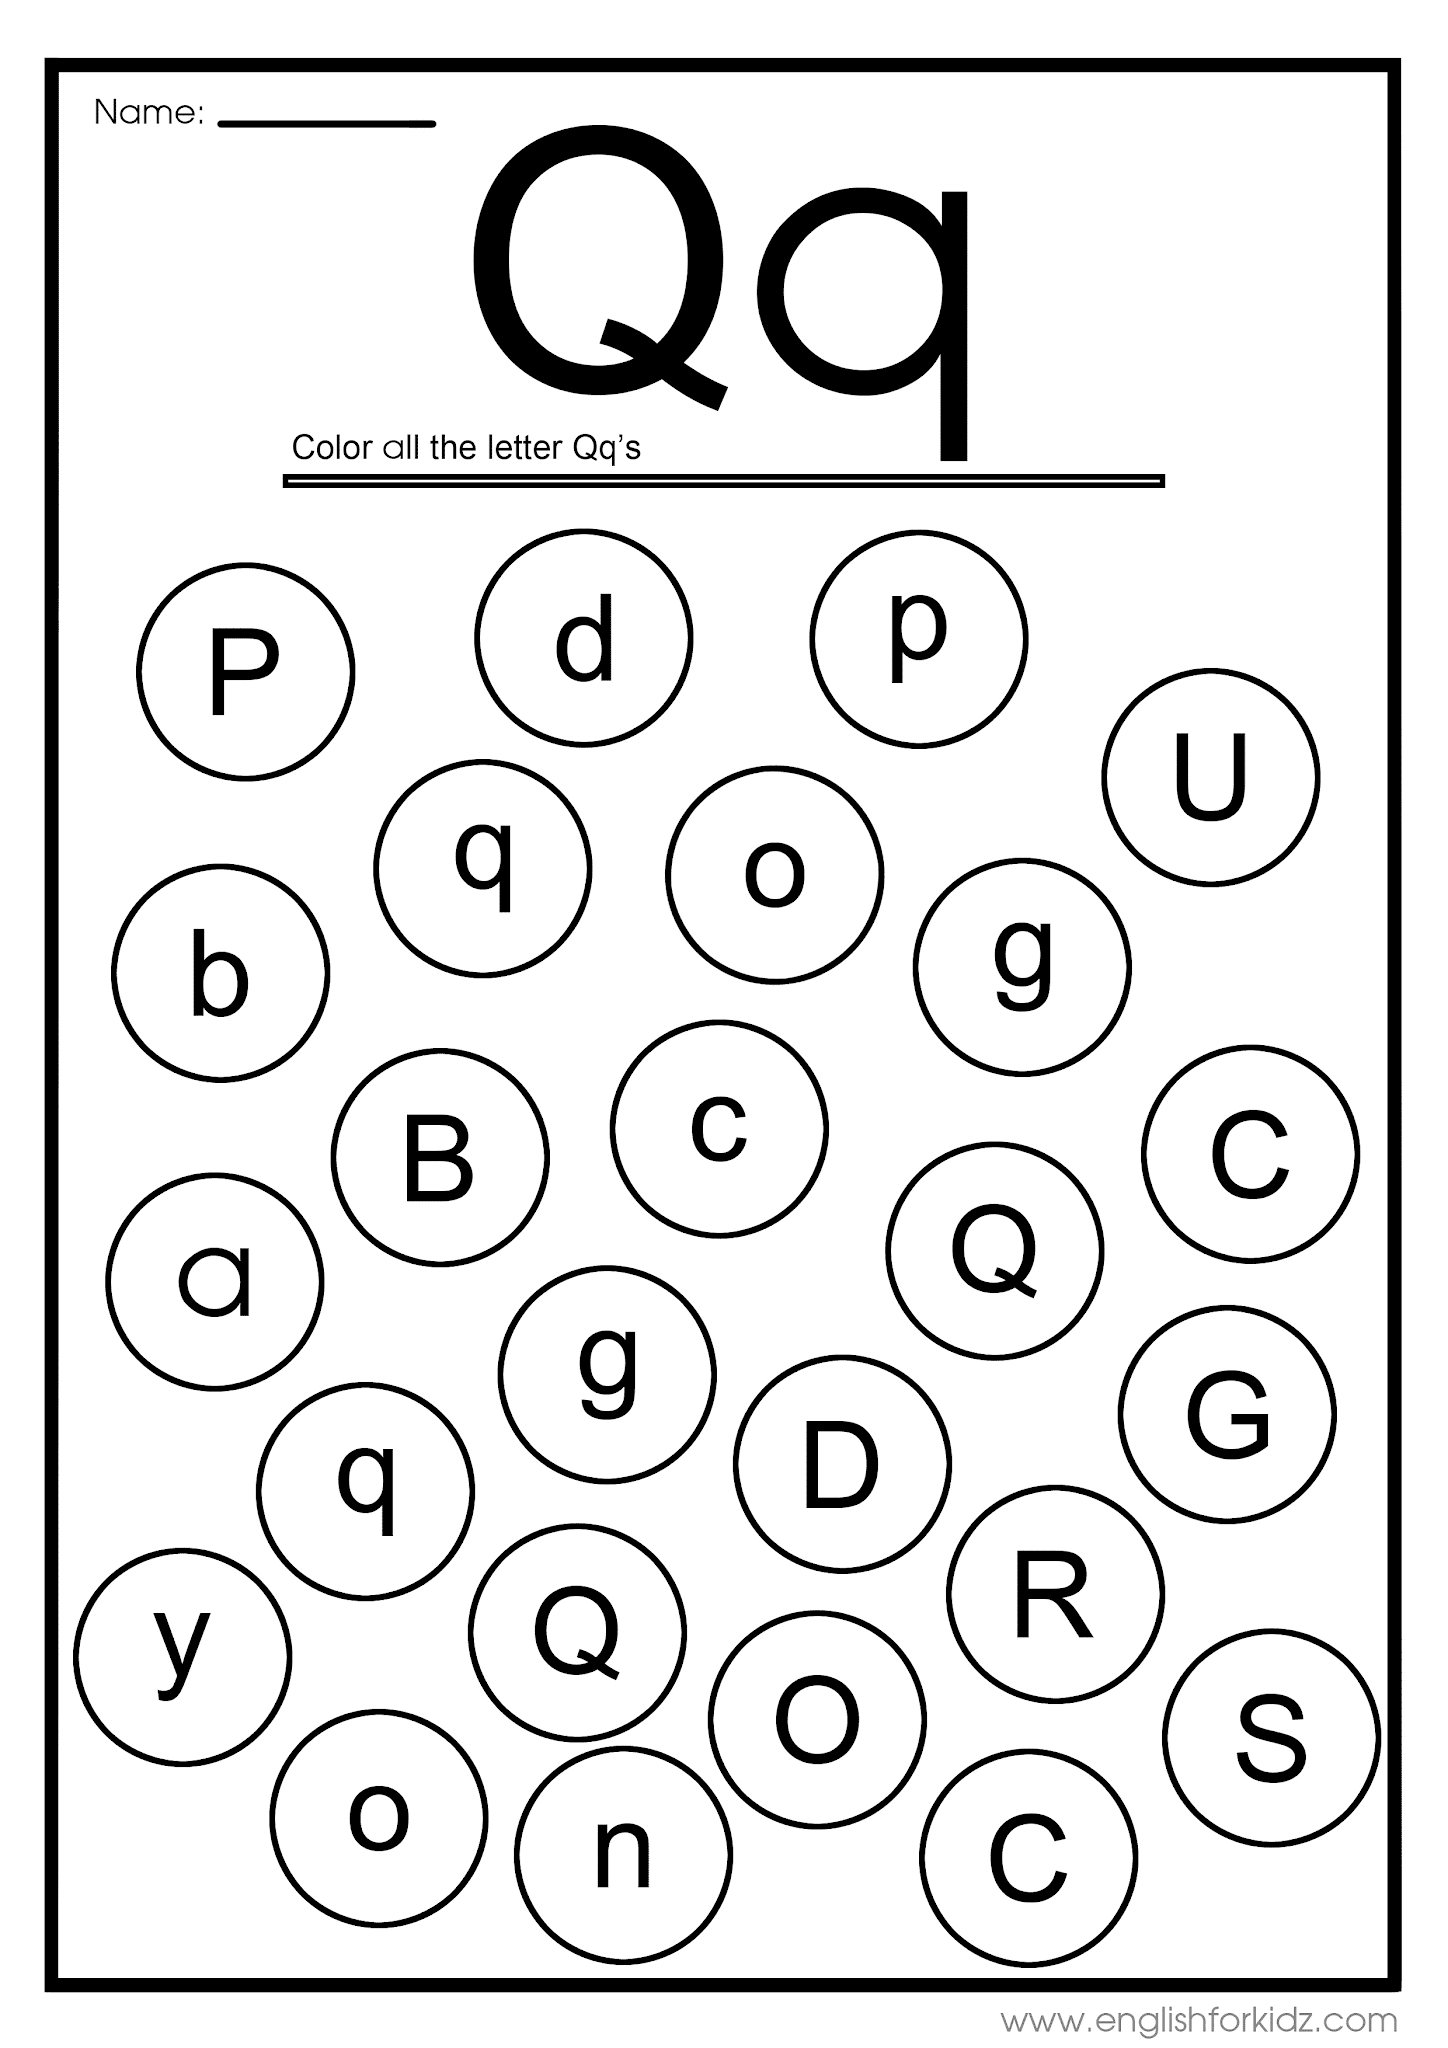 English for kids step by step letter q worksheets flash cards coloring pages